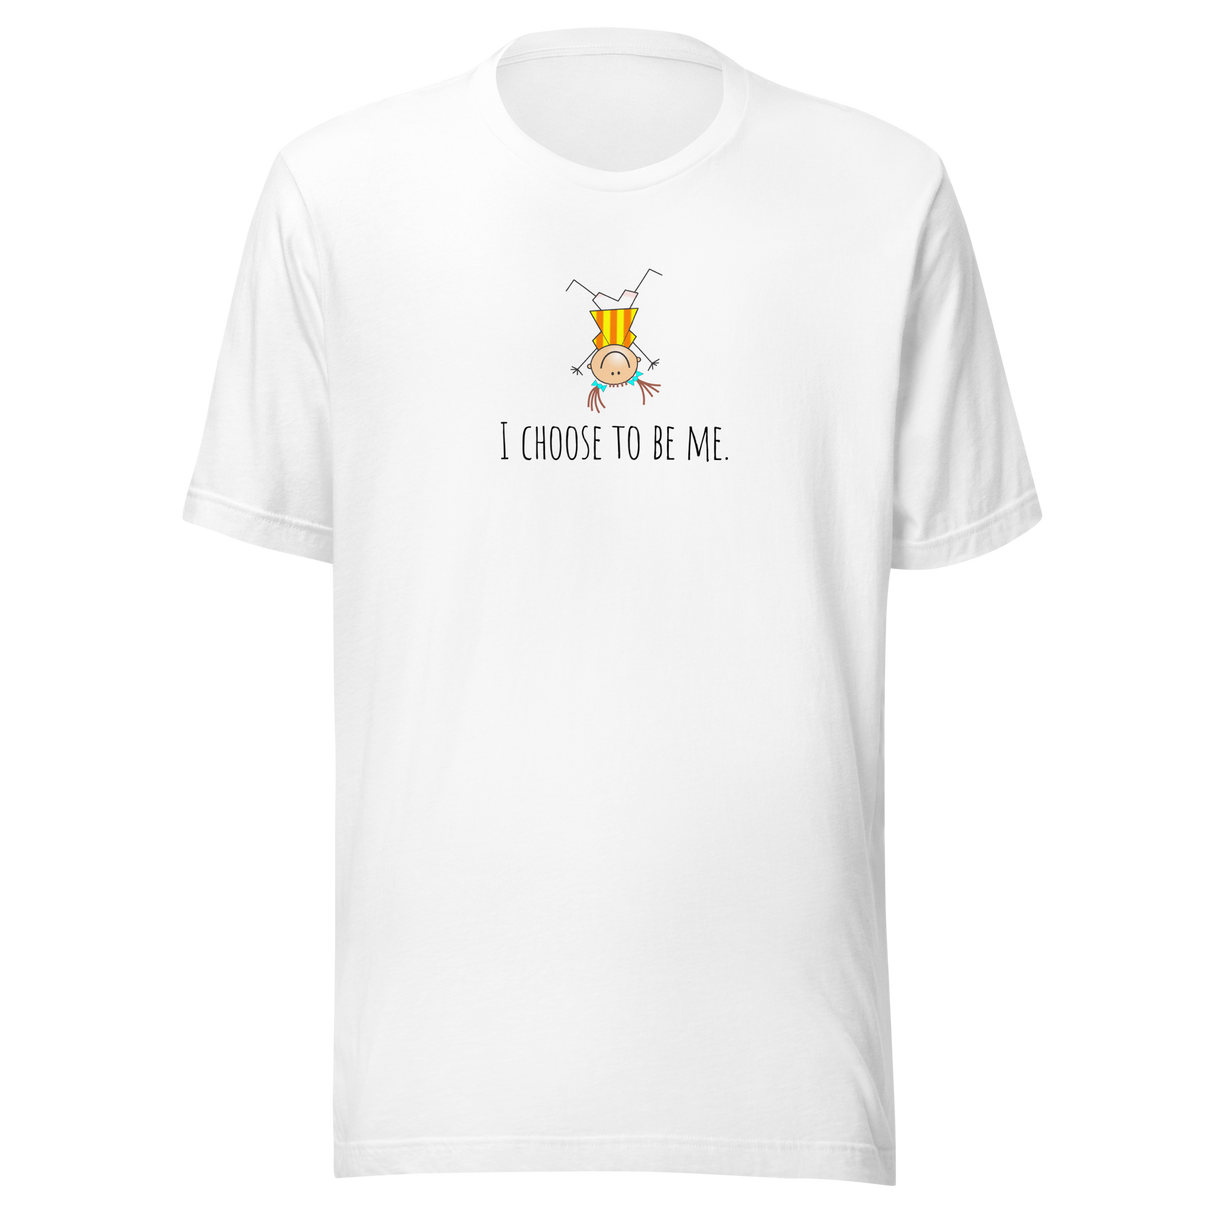 i-choose-to-be-me-happy-tee-choose-t-shirt-cool-tee-inspirational-t-shirt-lgbt-tee#color_white